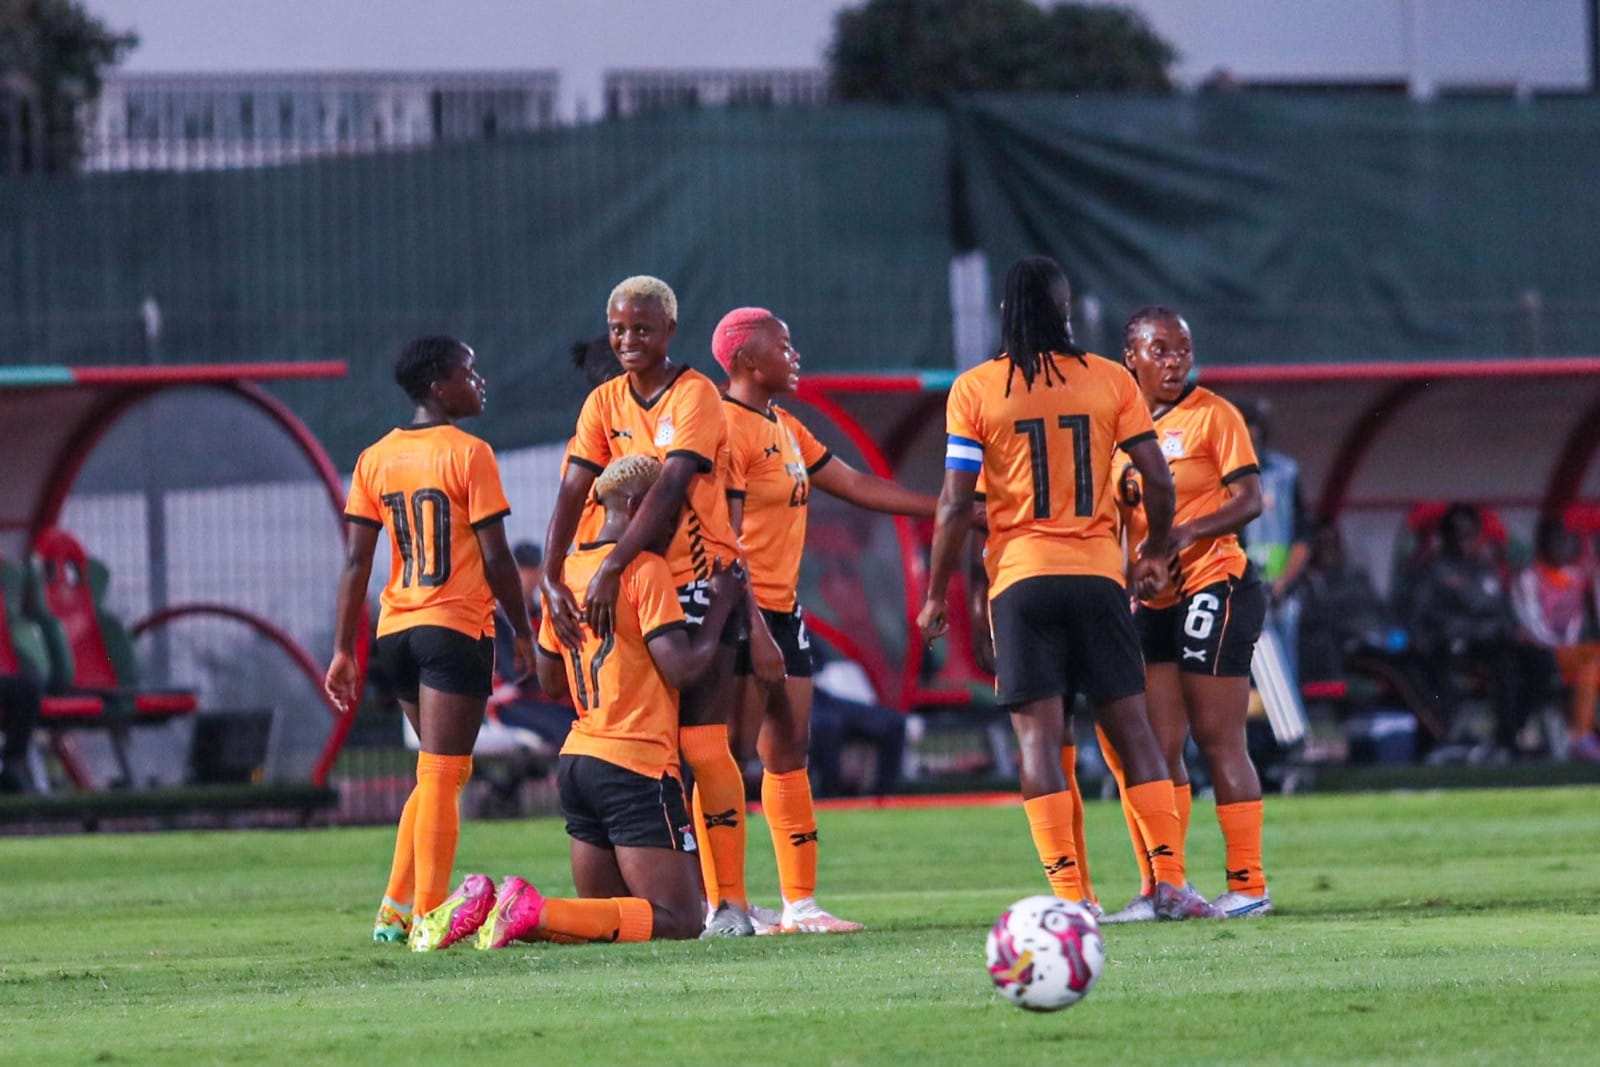 Zambia Dominates Morocco in a Thrilling 6-2 Victory: International Women's Friendly Recap